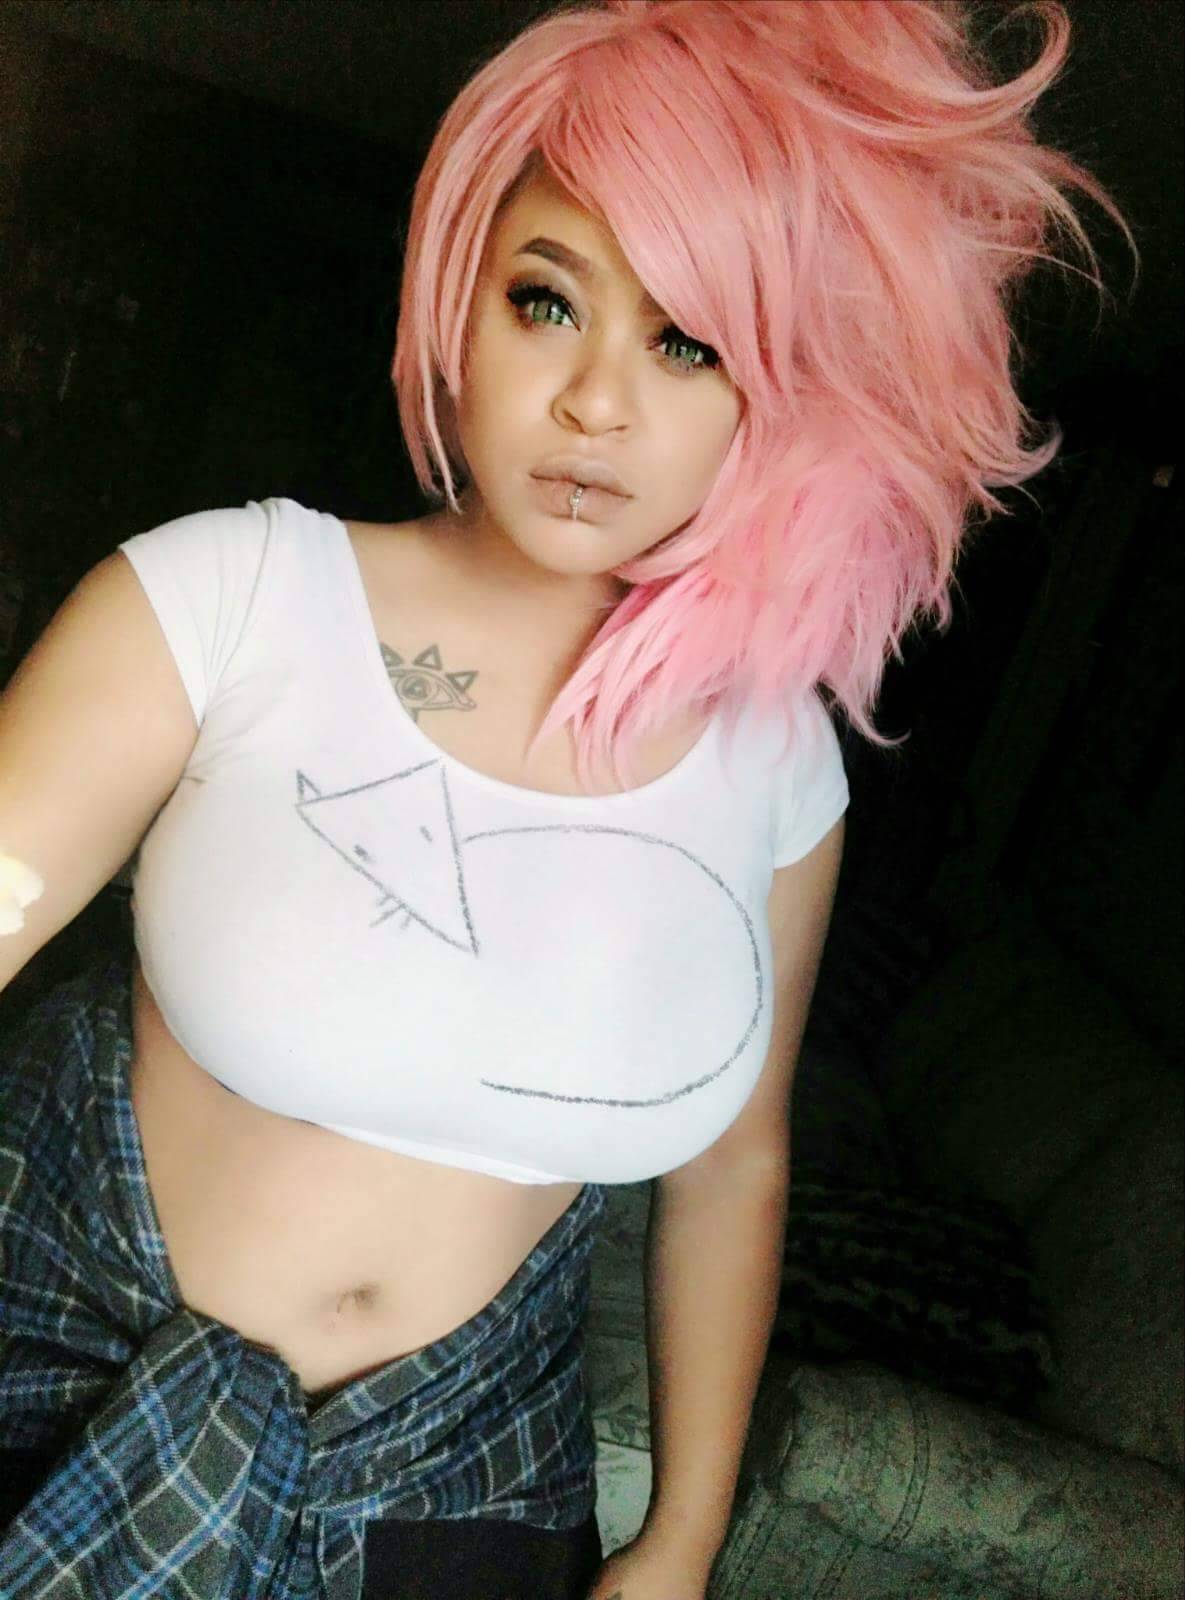 You guys remember the chick who cosplayed Mystery Girl? SHE JUST DID ROSE TOO!!!!